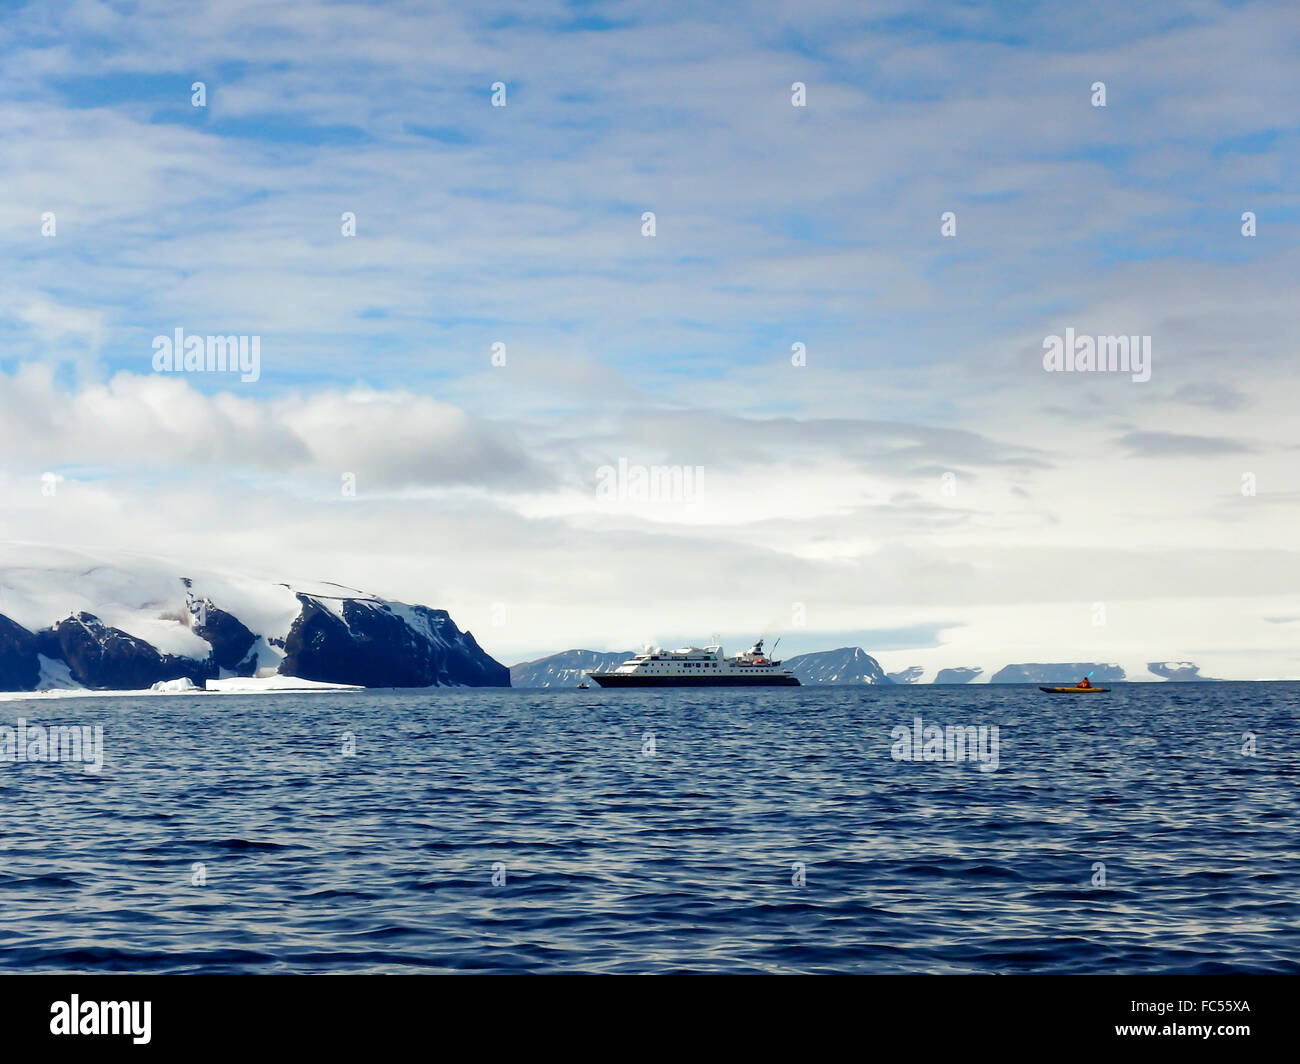 Cruise ship in Gustaf Sound in the Wheddle Sea of Antarctica with kayakers. Stock Photo